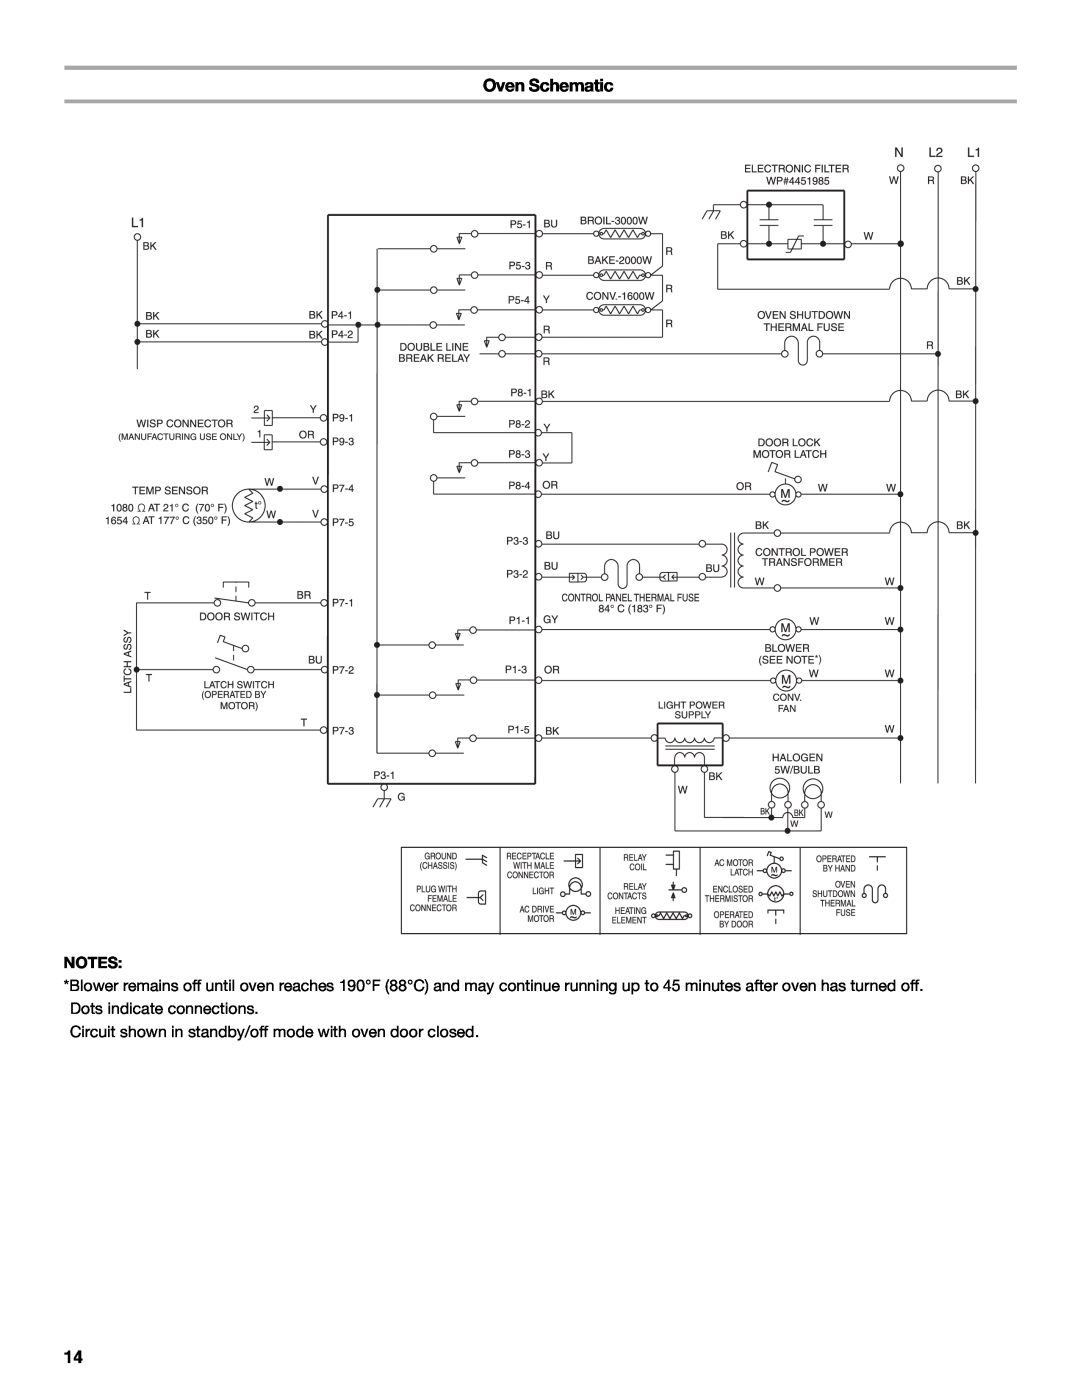 KitchenAid 9759121A installation instructions Oven Schematic, Circuit shown in standby/off mode with oven door closed 